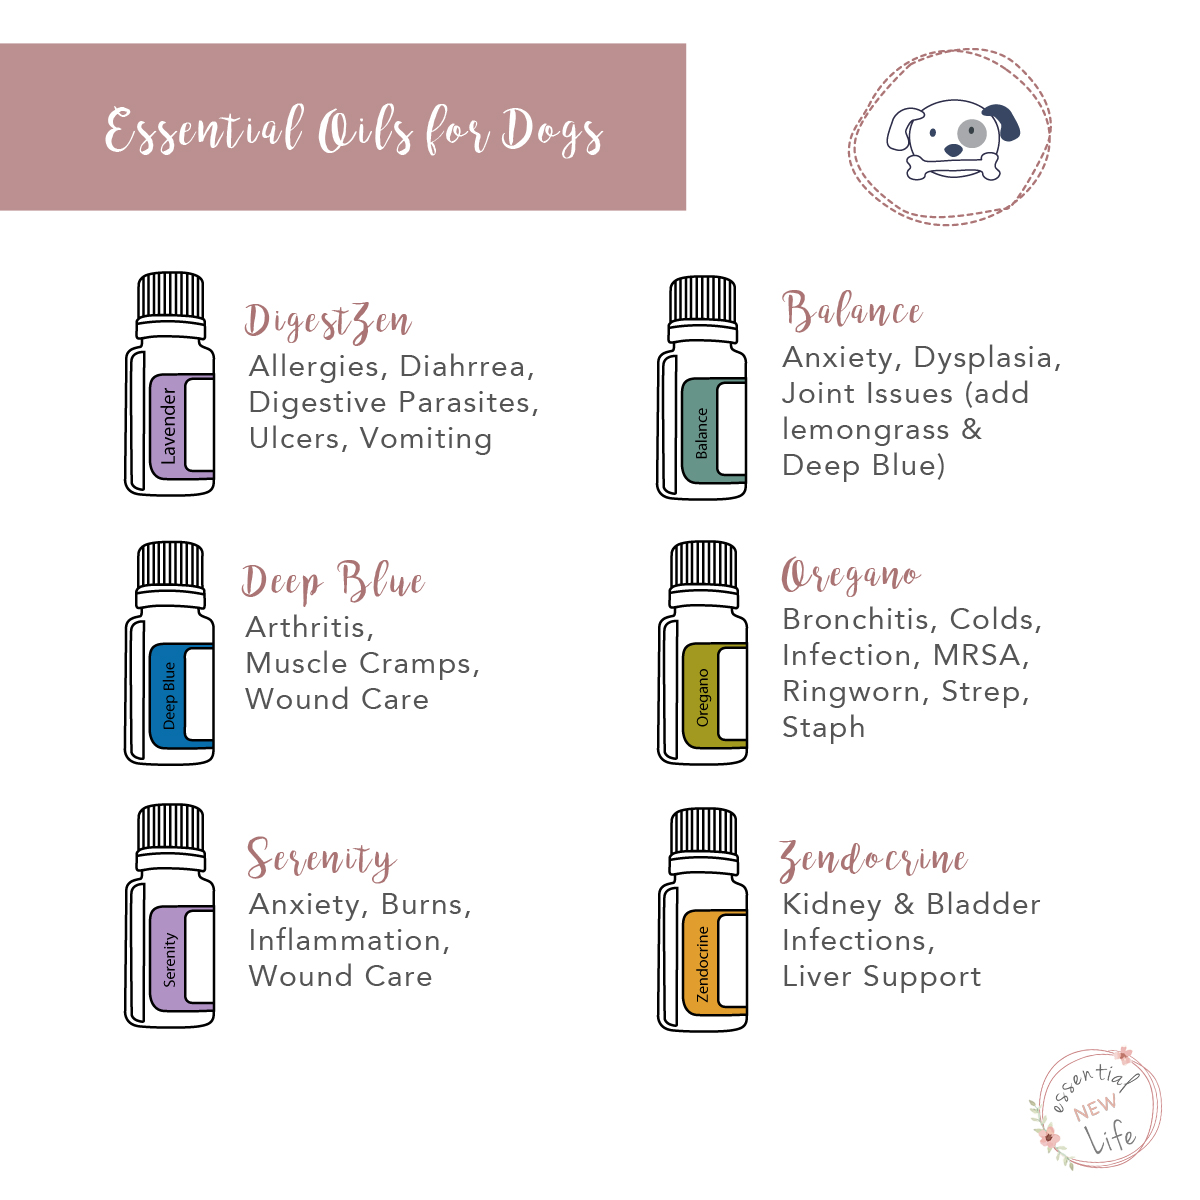 Essential New Life | Essential Oils for Dogs